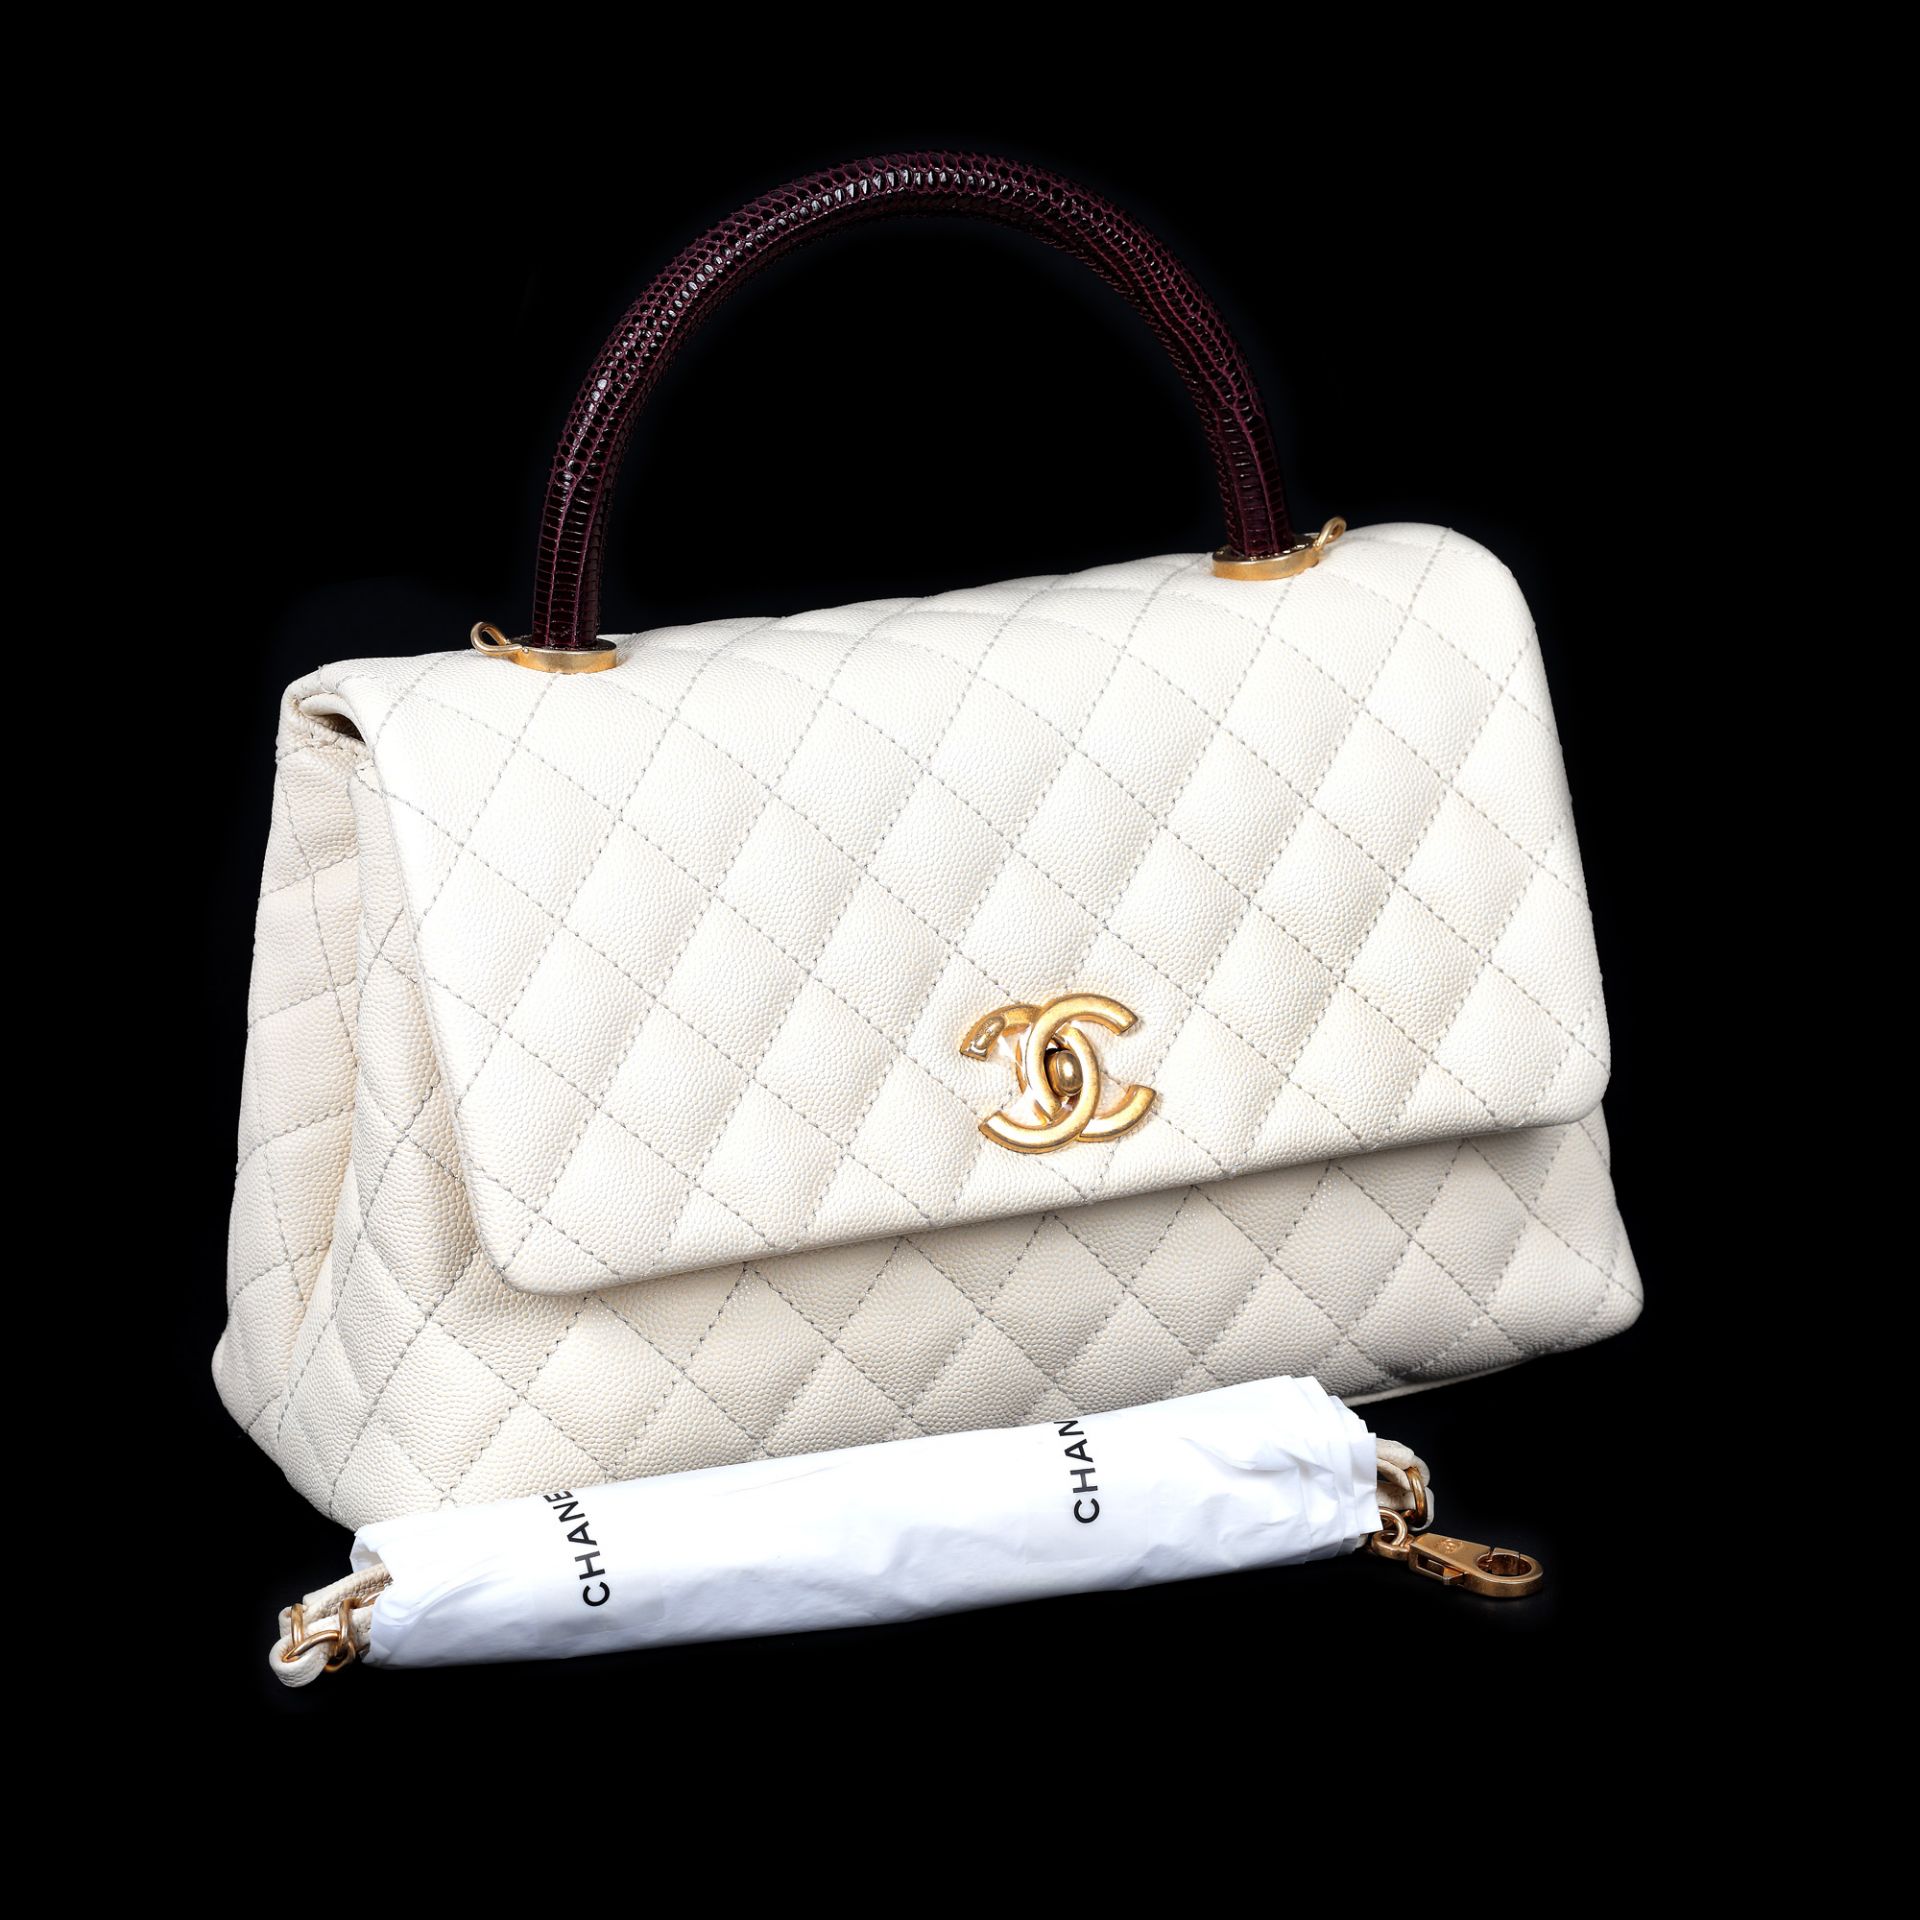 "Coco Handle Bag" - Chanel bag, quilted leather, white, lizard leather handle, burgundy - Image 3 of 11